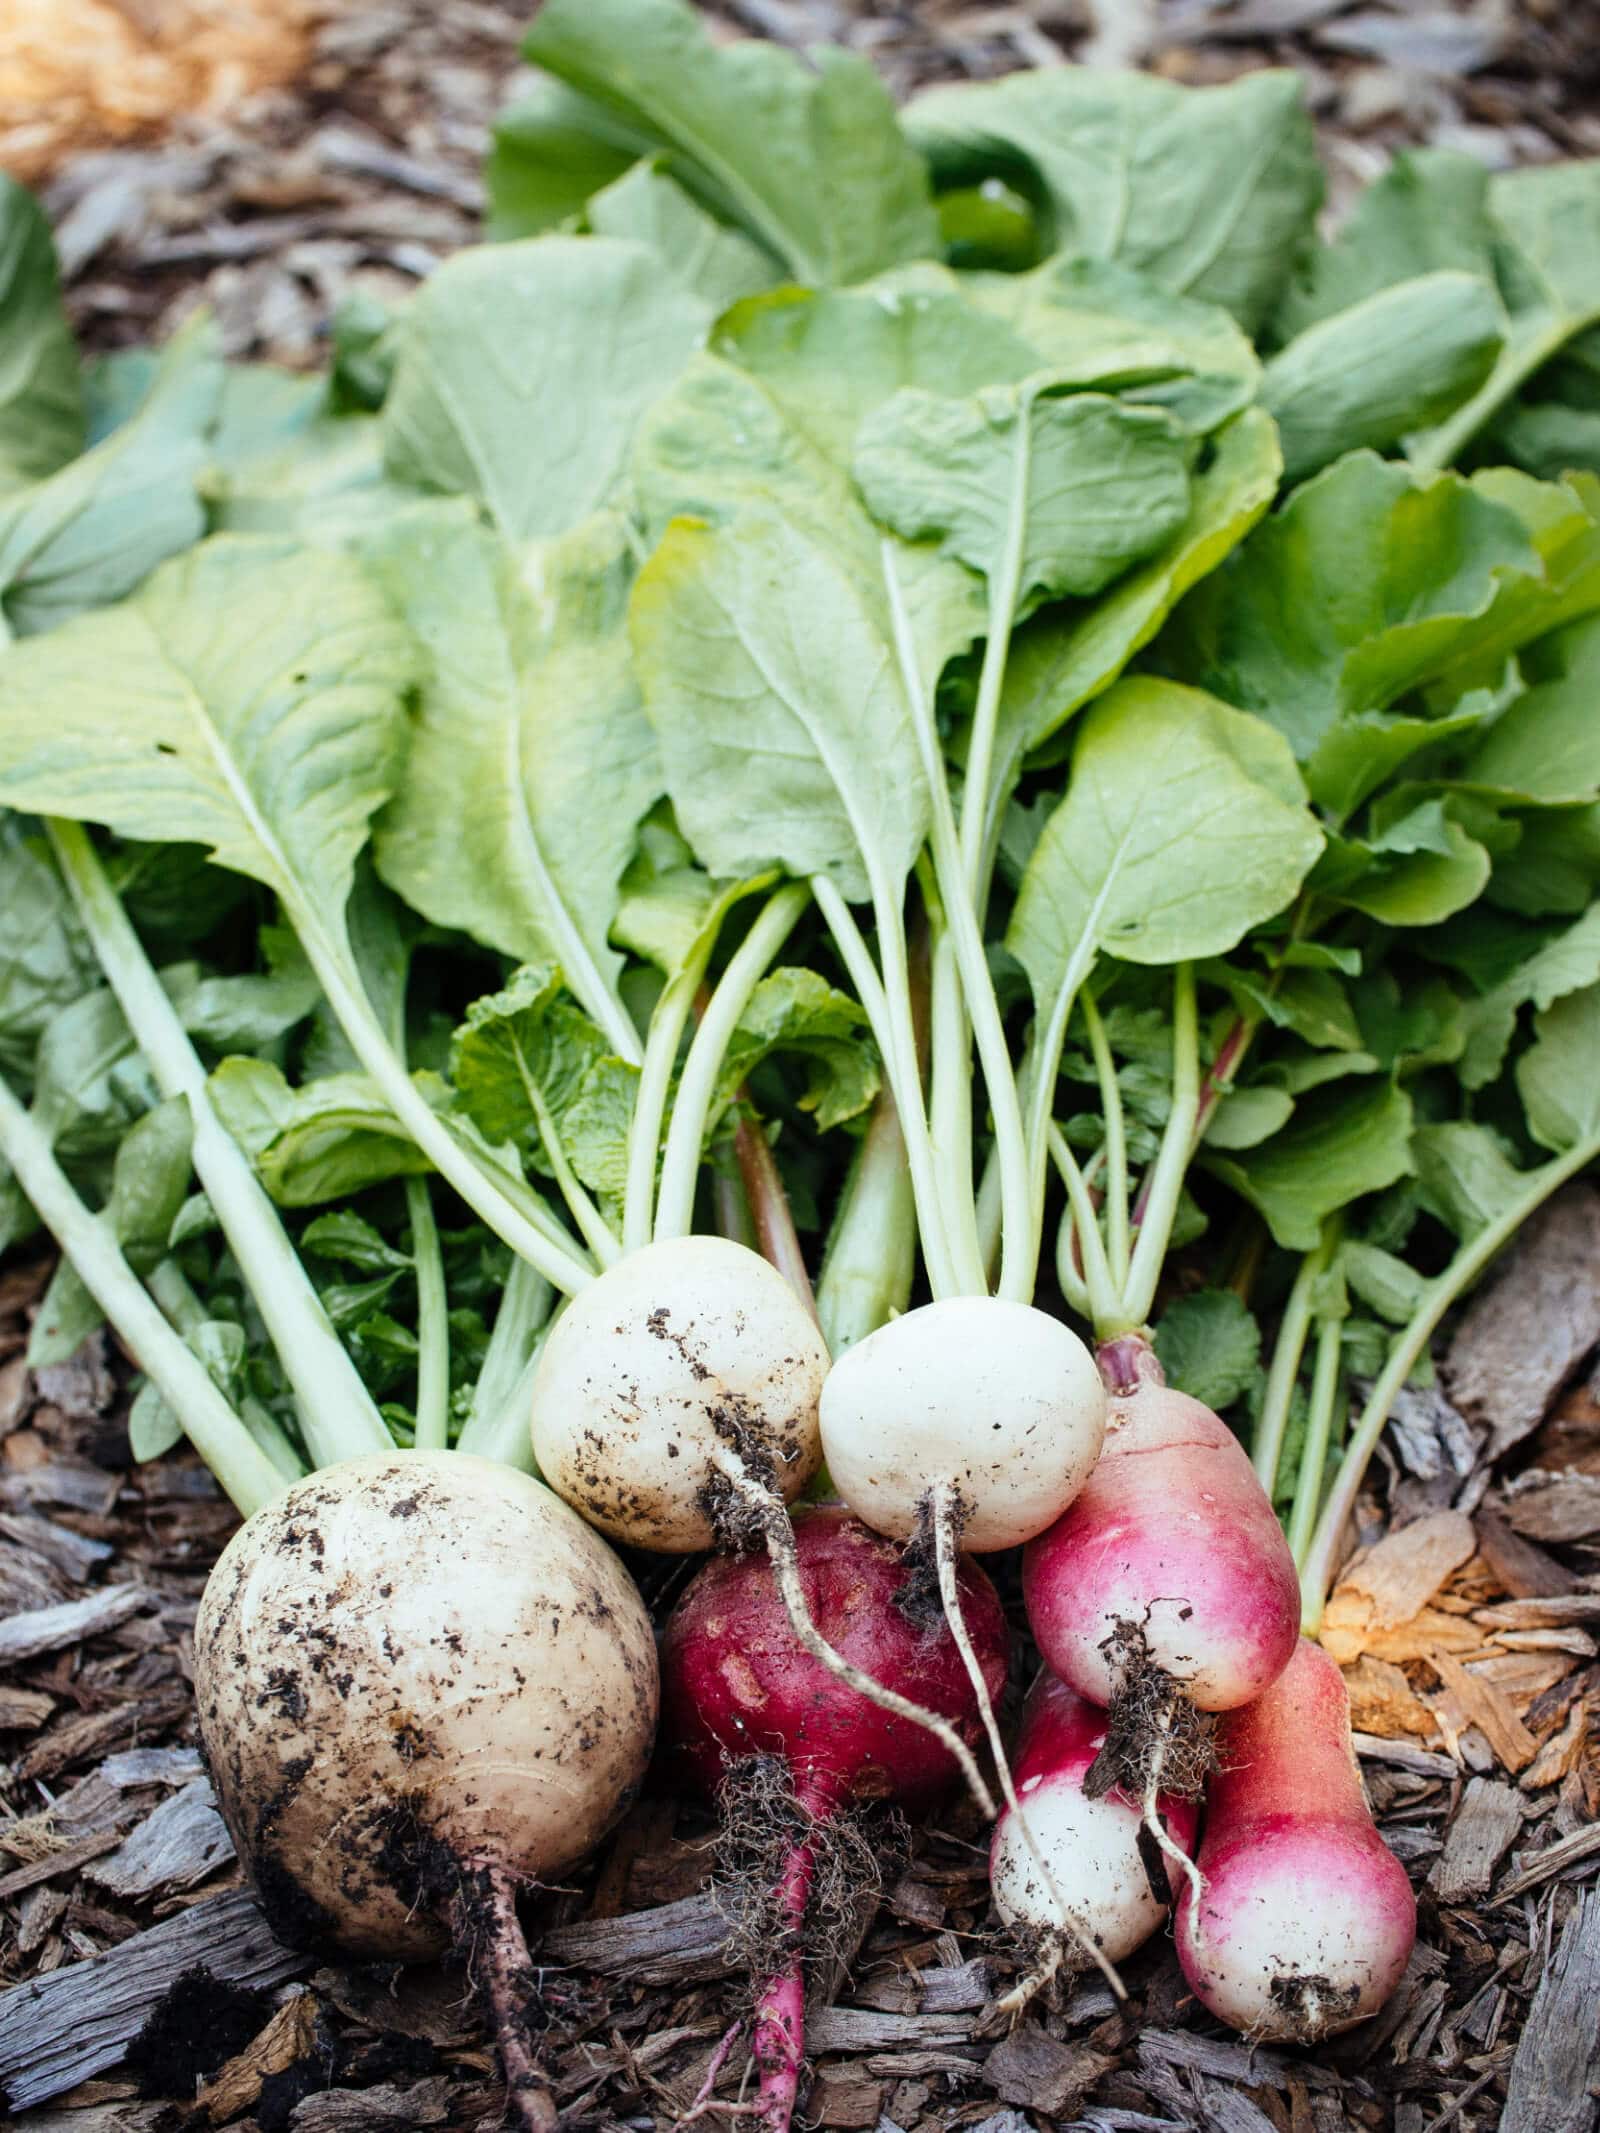 Don't toss those radish tops—they're delicious